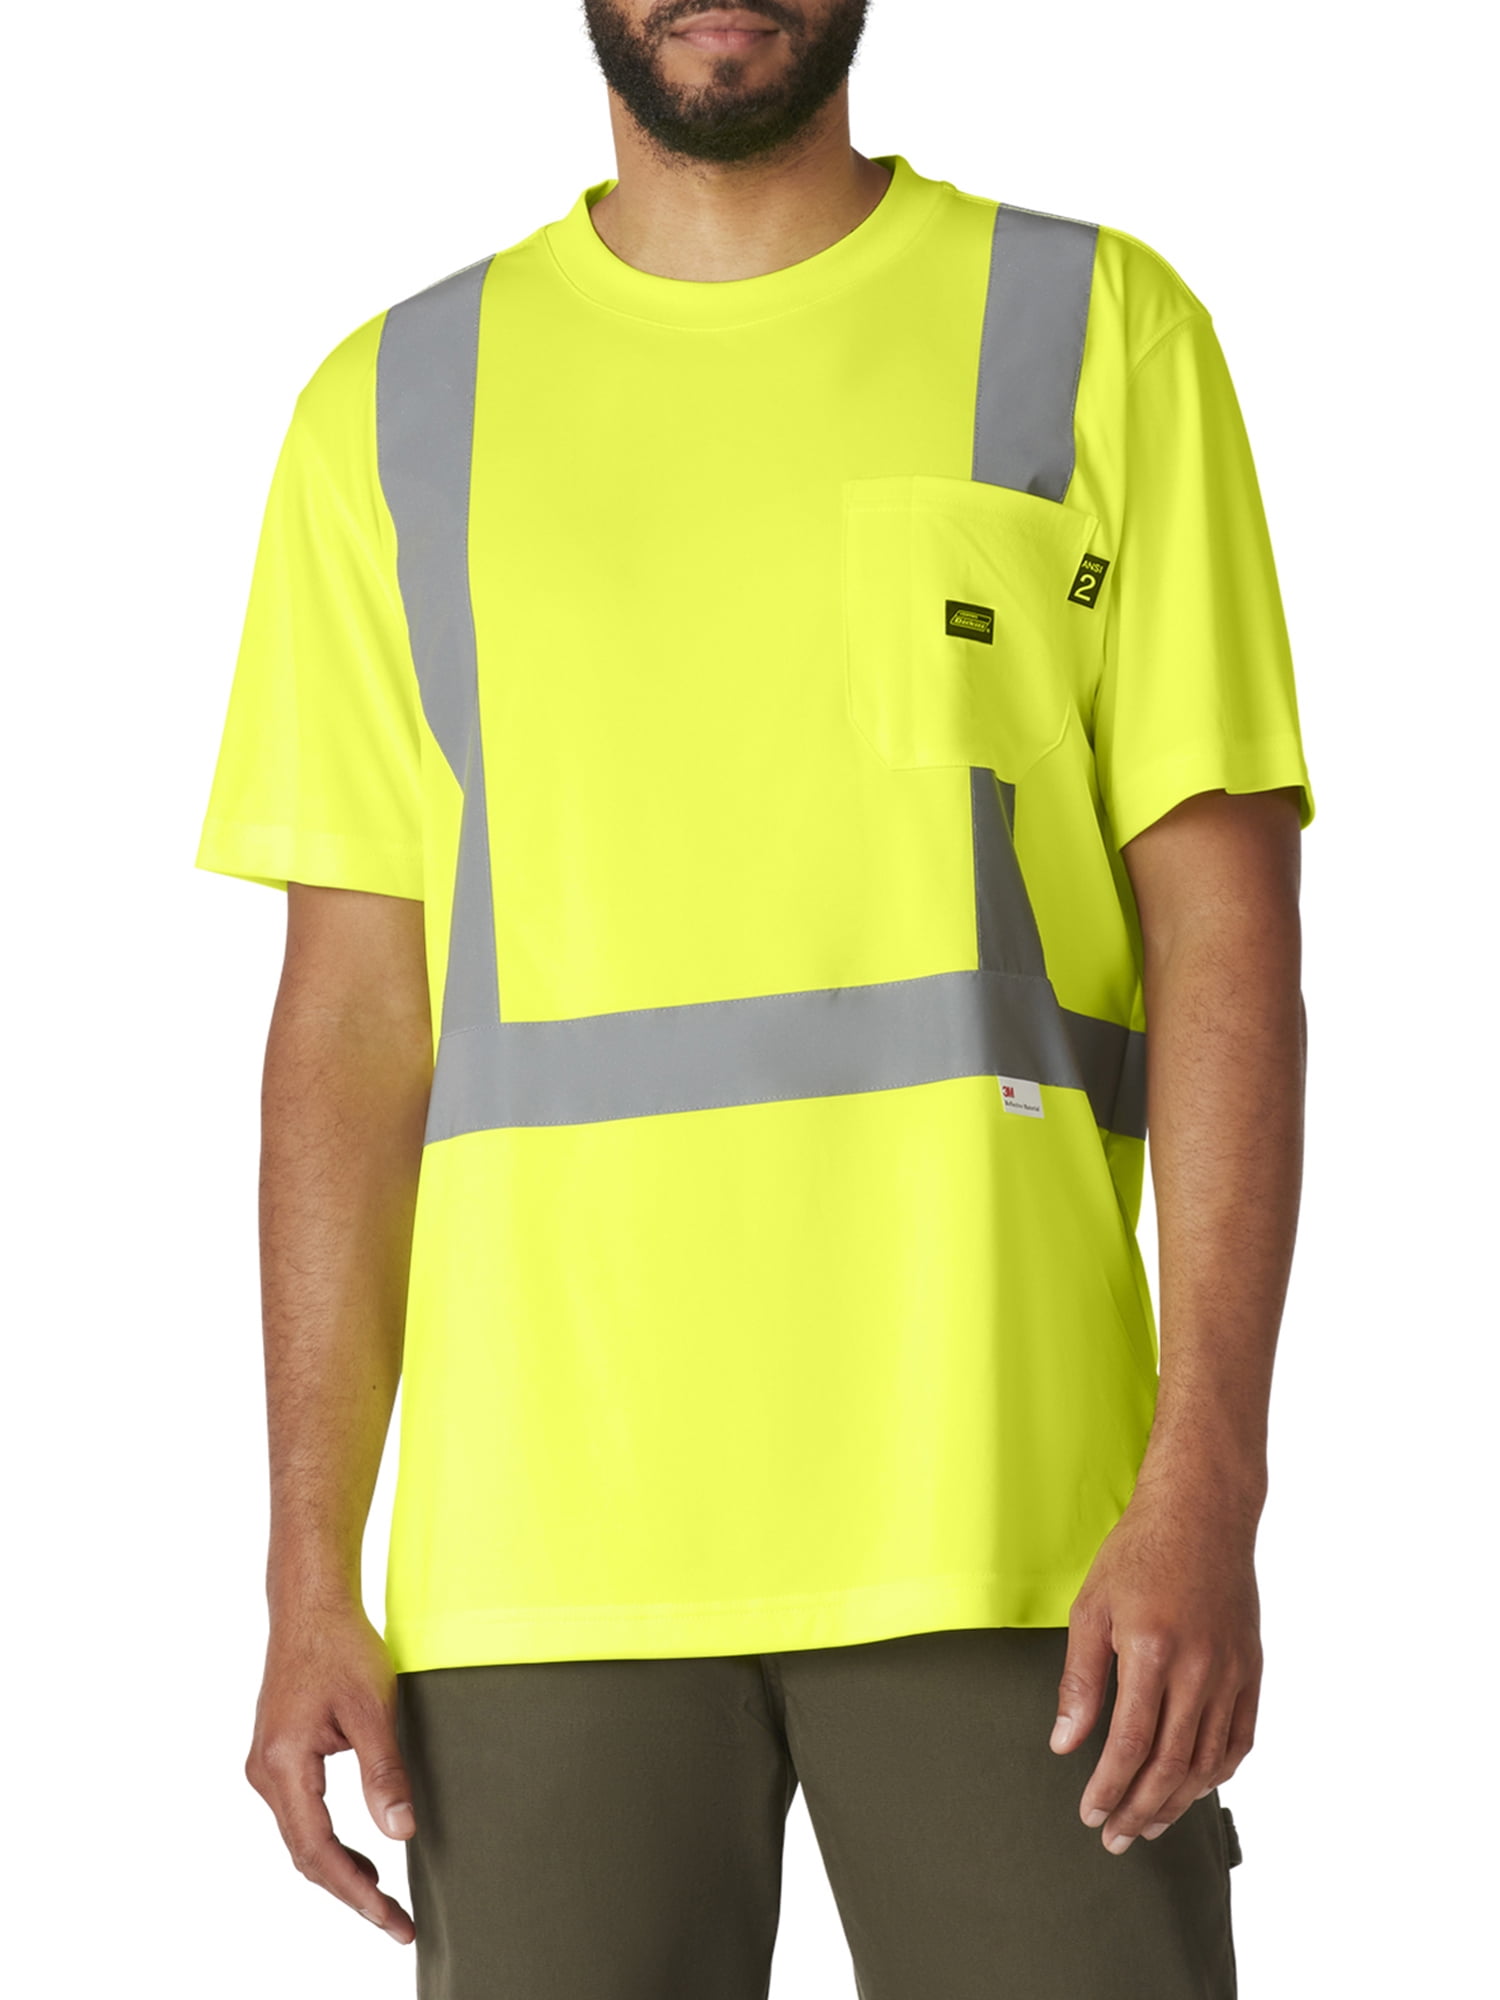 3M™ Dickies Long Sleeve Scotchlite™ with Genuine Safety Reflective Tee Hi-Vis Men\'s Taping